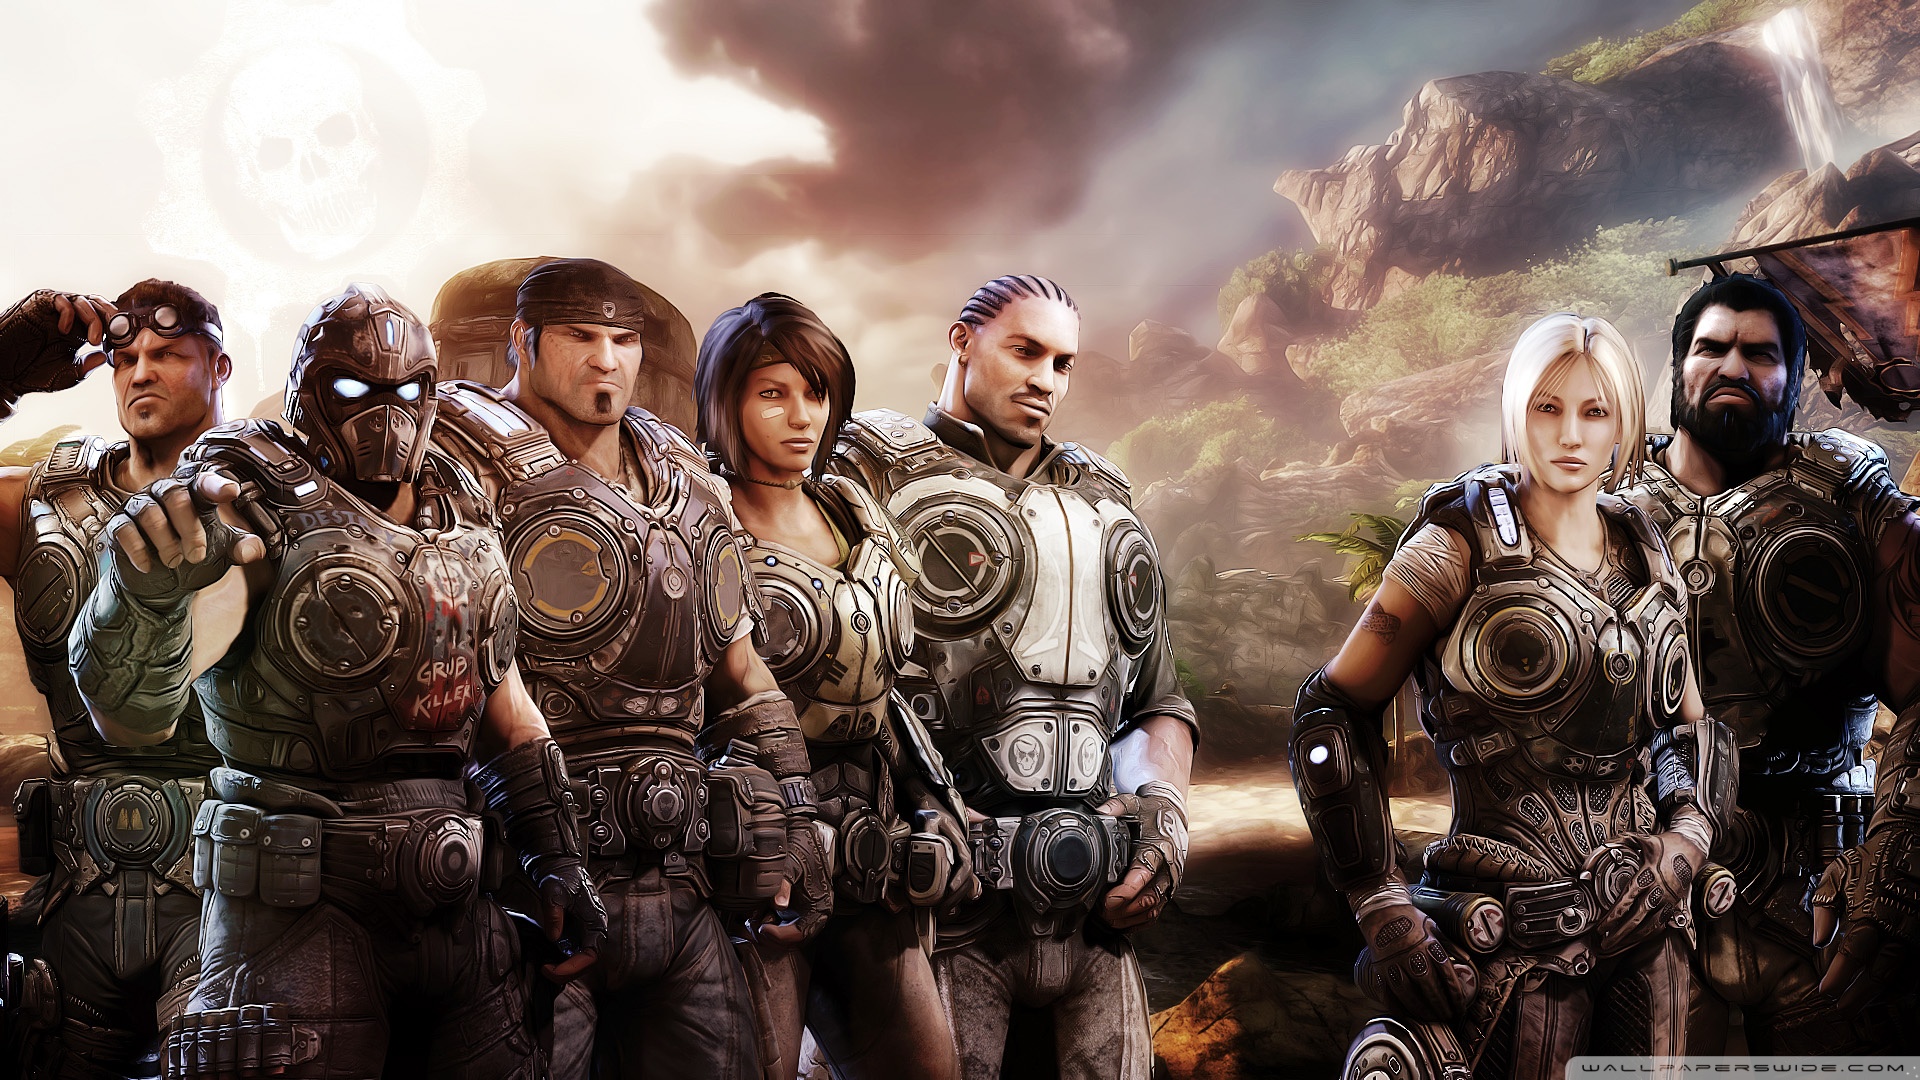 wallpapers de gears of war,action adventure game,movie,shooter game,strategy video game,pc game